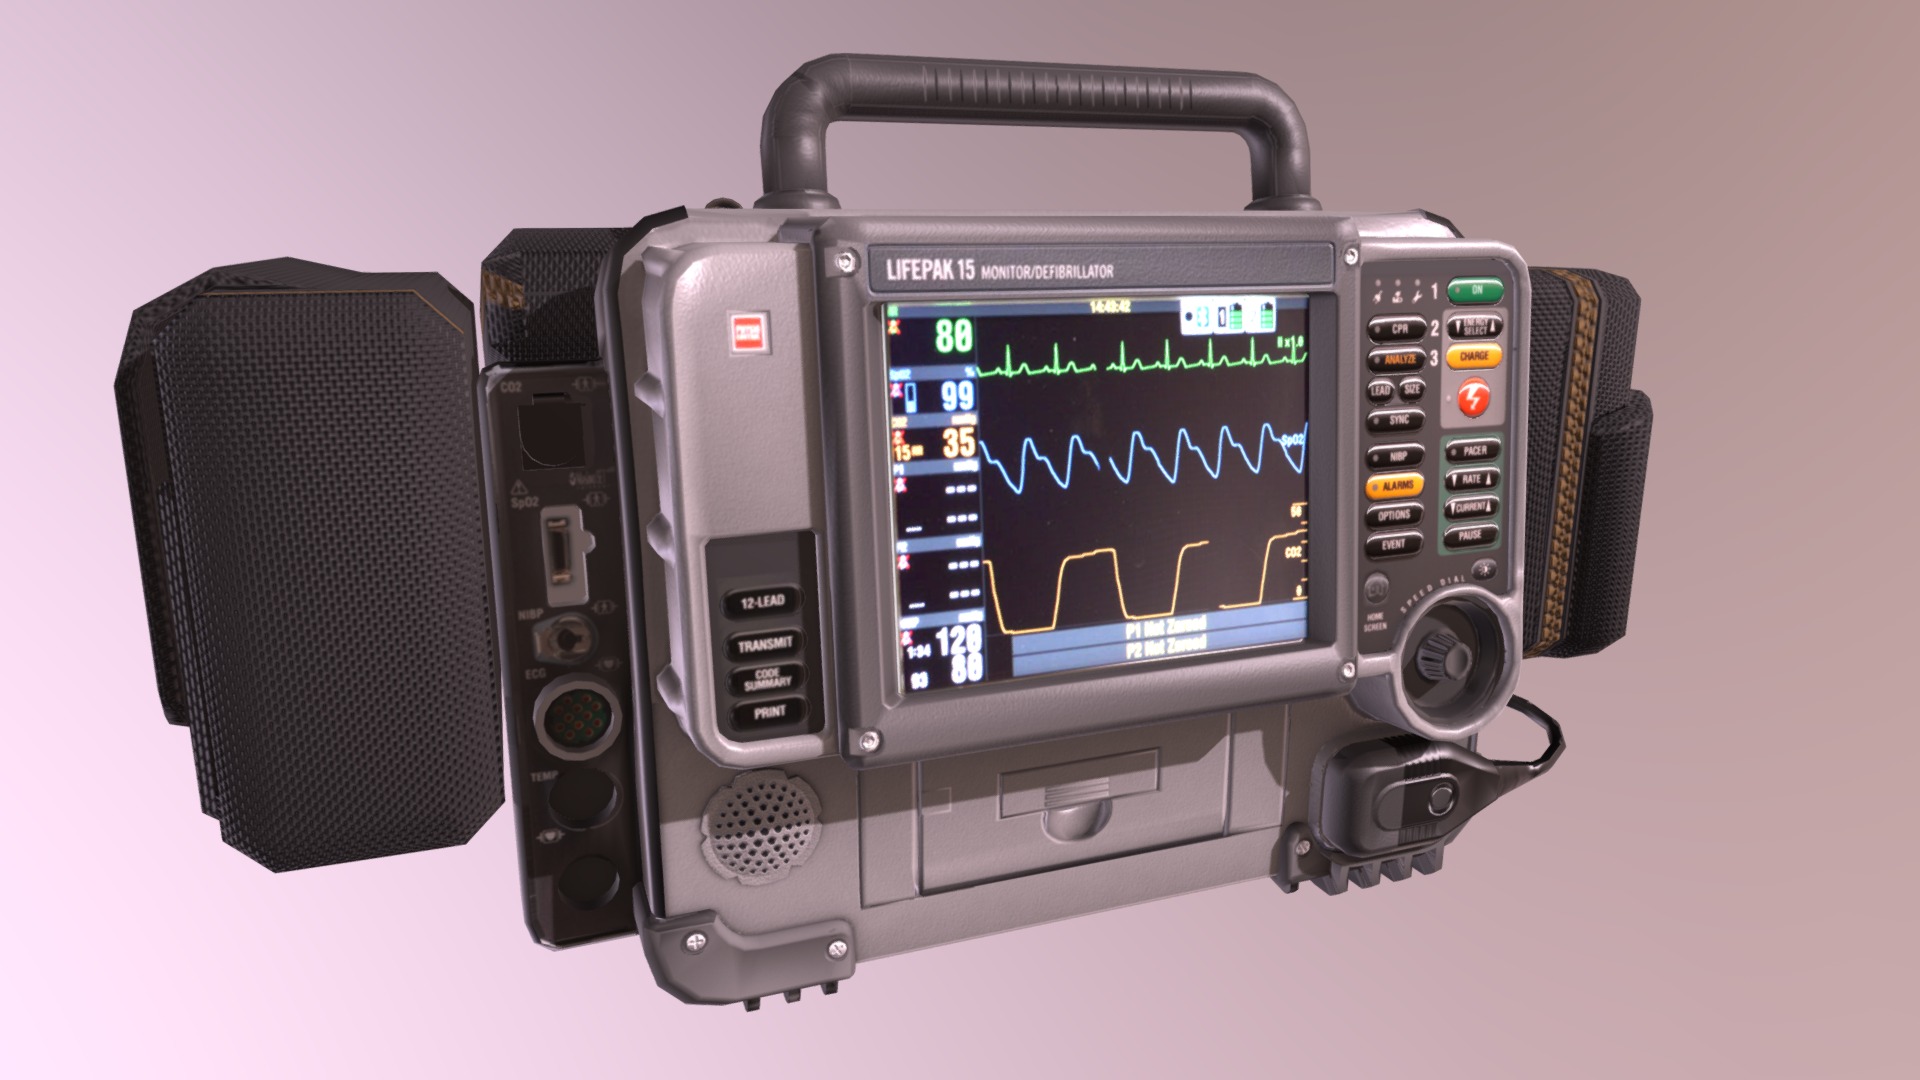 3D model Stryker Lifepak 15 - This is a 3D model of the Stryker Lifepak 15. The 3D model is about a digital camera with a screen.